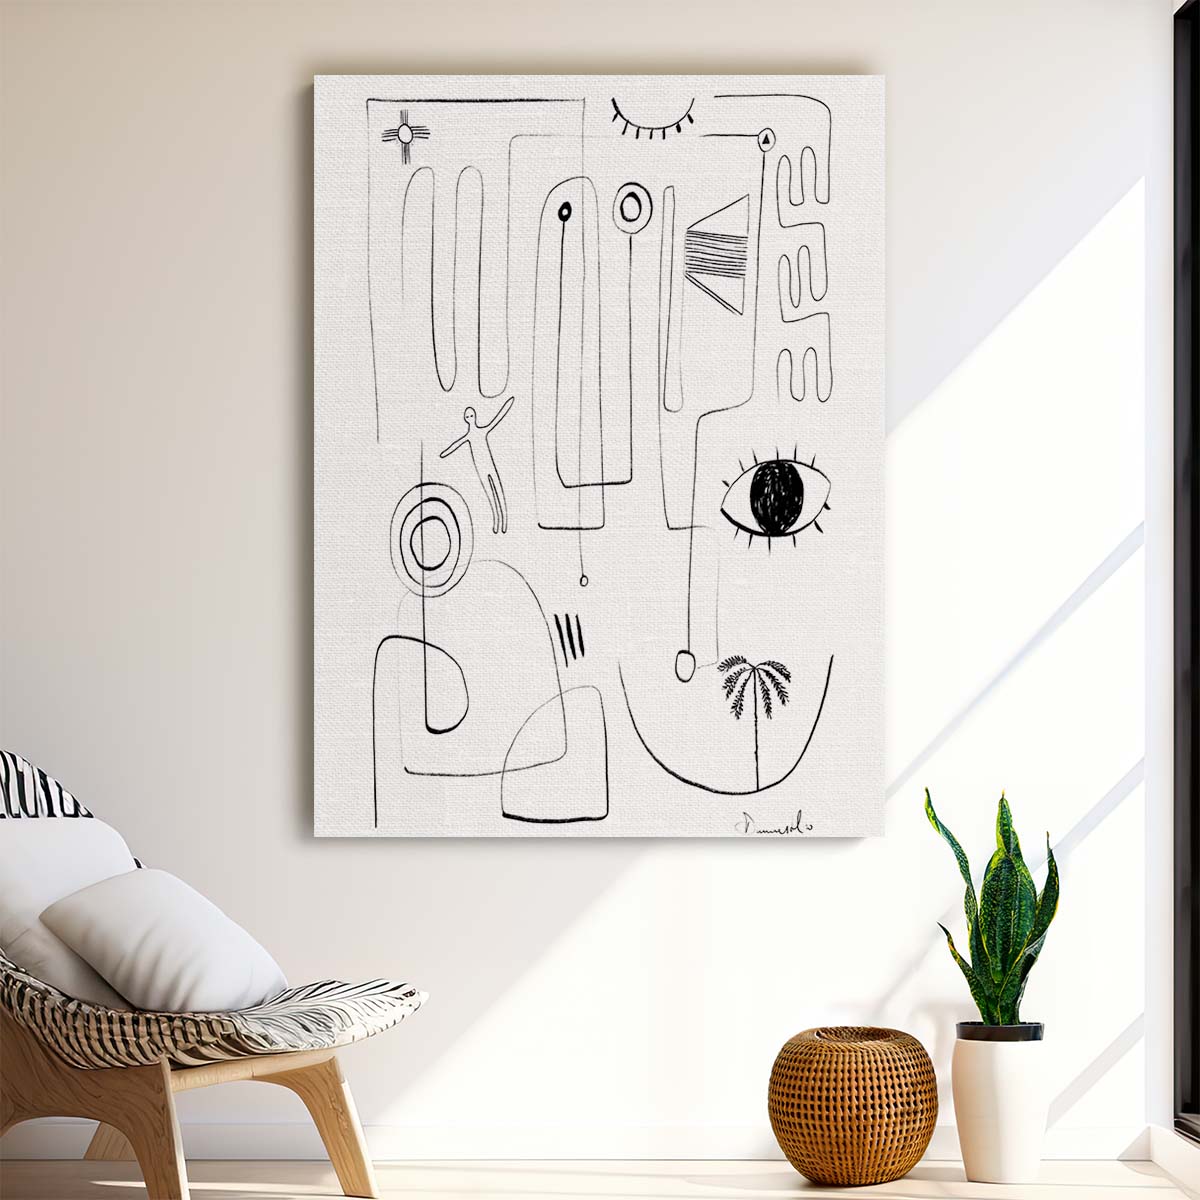 Dan Hobday Monochrome Abstract Illustration - Eye & Palm Tree Line Art by Luxuriance Designs, made in USA